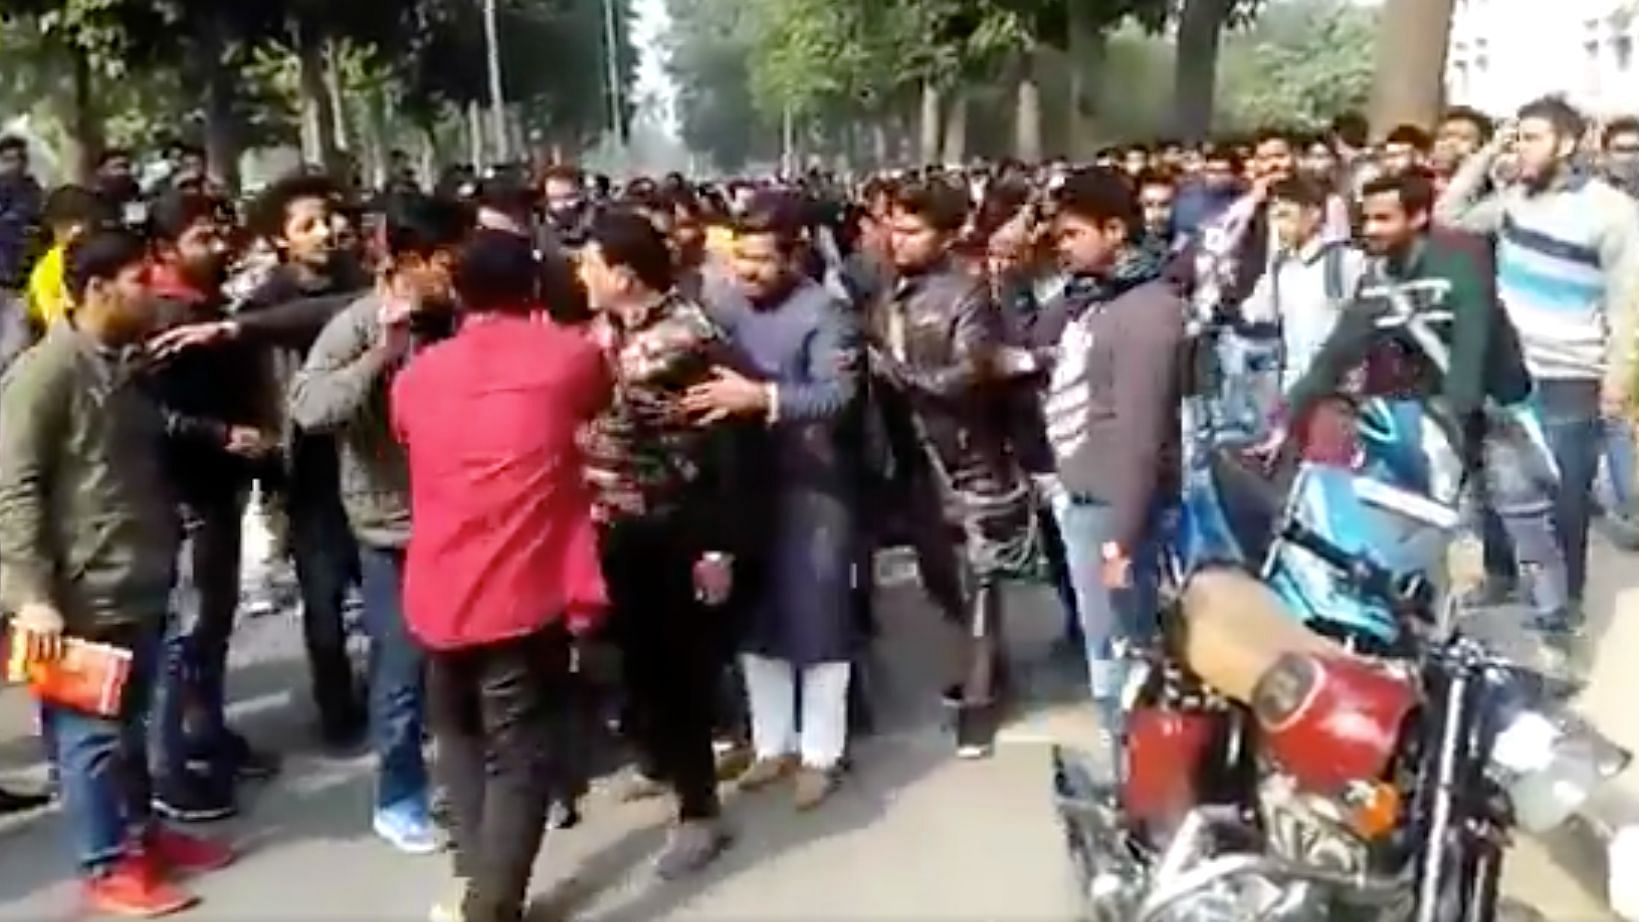 14 students were booked under sedition for allegedly raising ‘anti-India’ slogans during a scuffle at AMU.